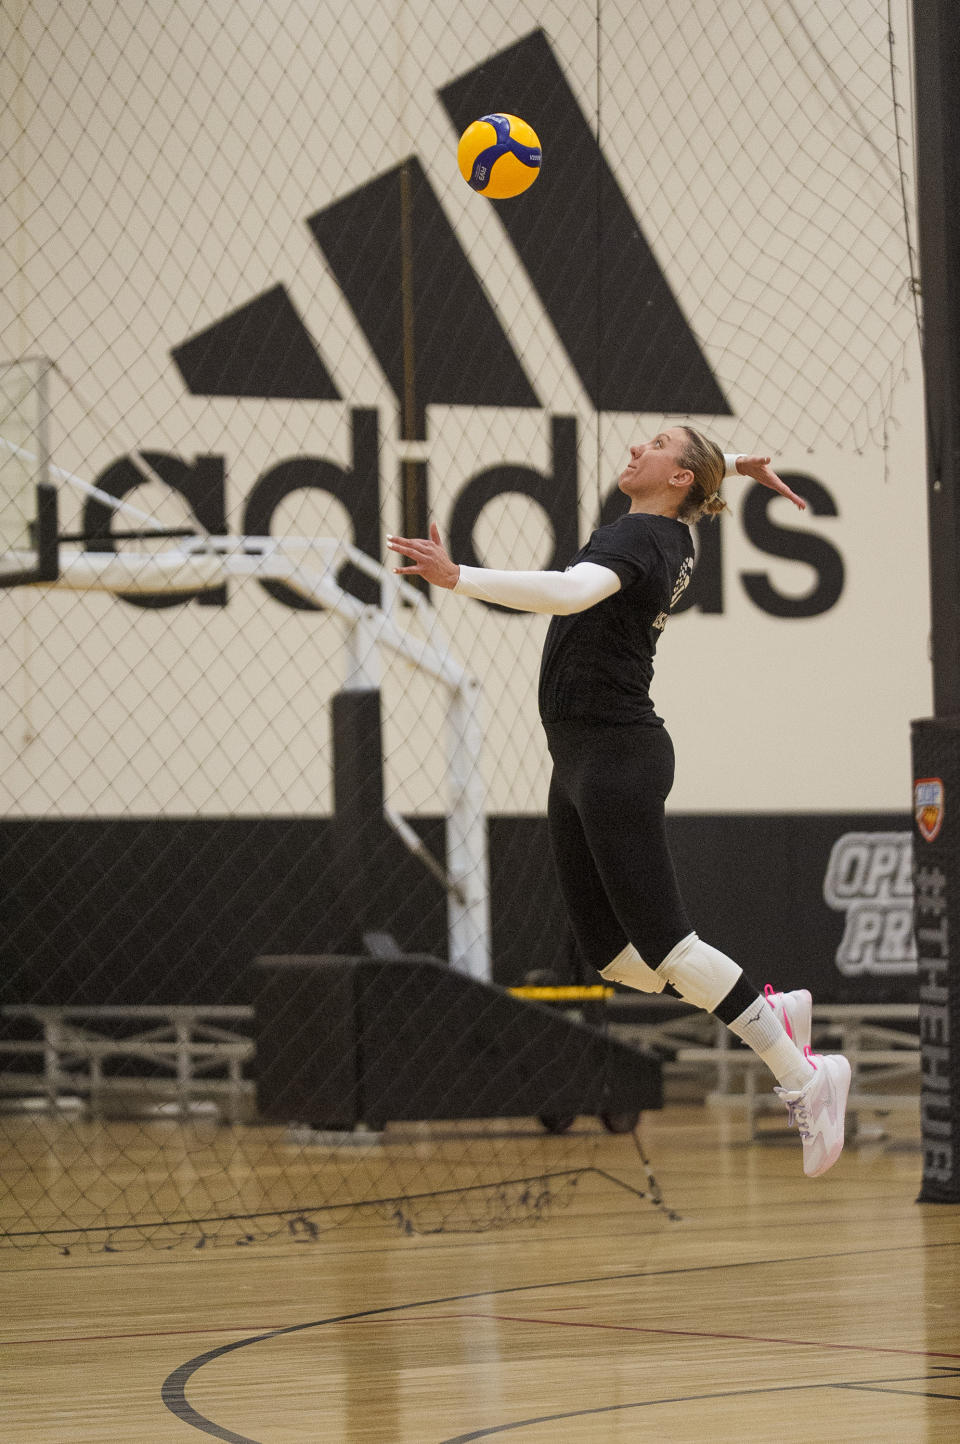 Four-time Olympian Jordan Larson joins the USA Volleyball Spring Training Camp at Open Gym Premier in Anaheim, Calif., on March 12, 2024. (AP Photo/Damian Dovarganes)